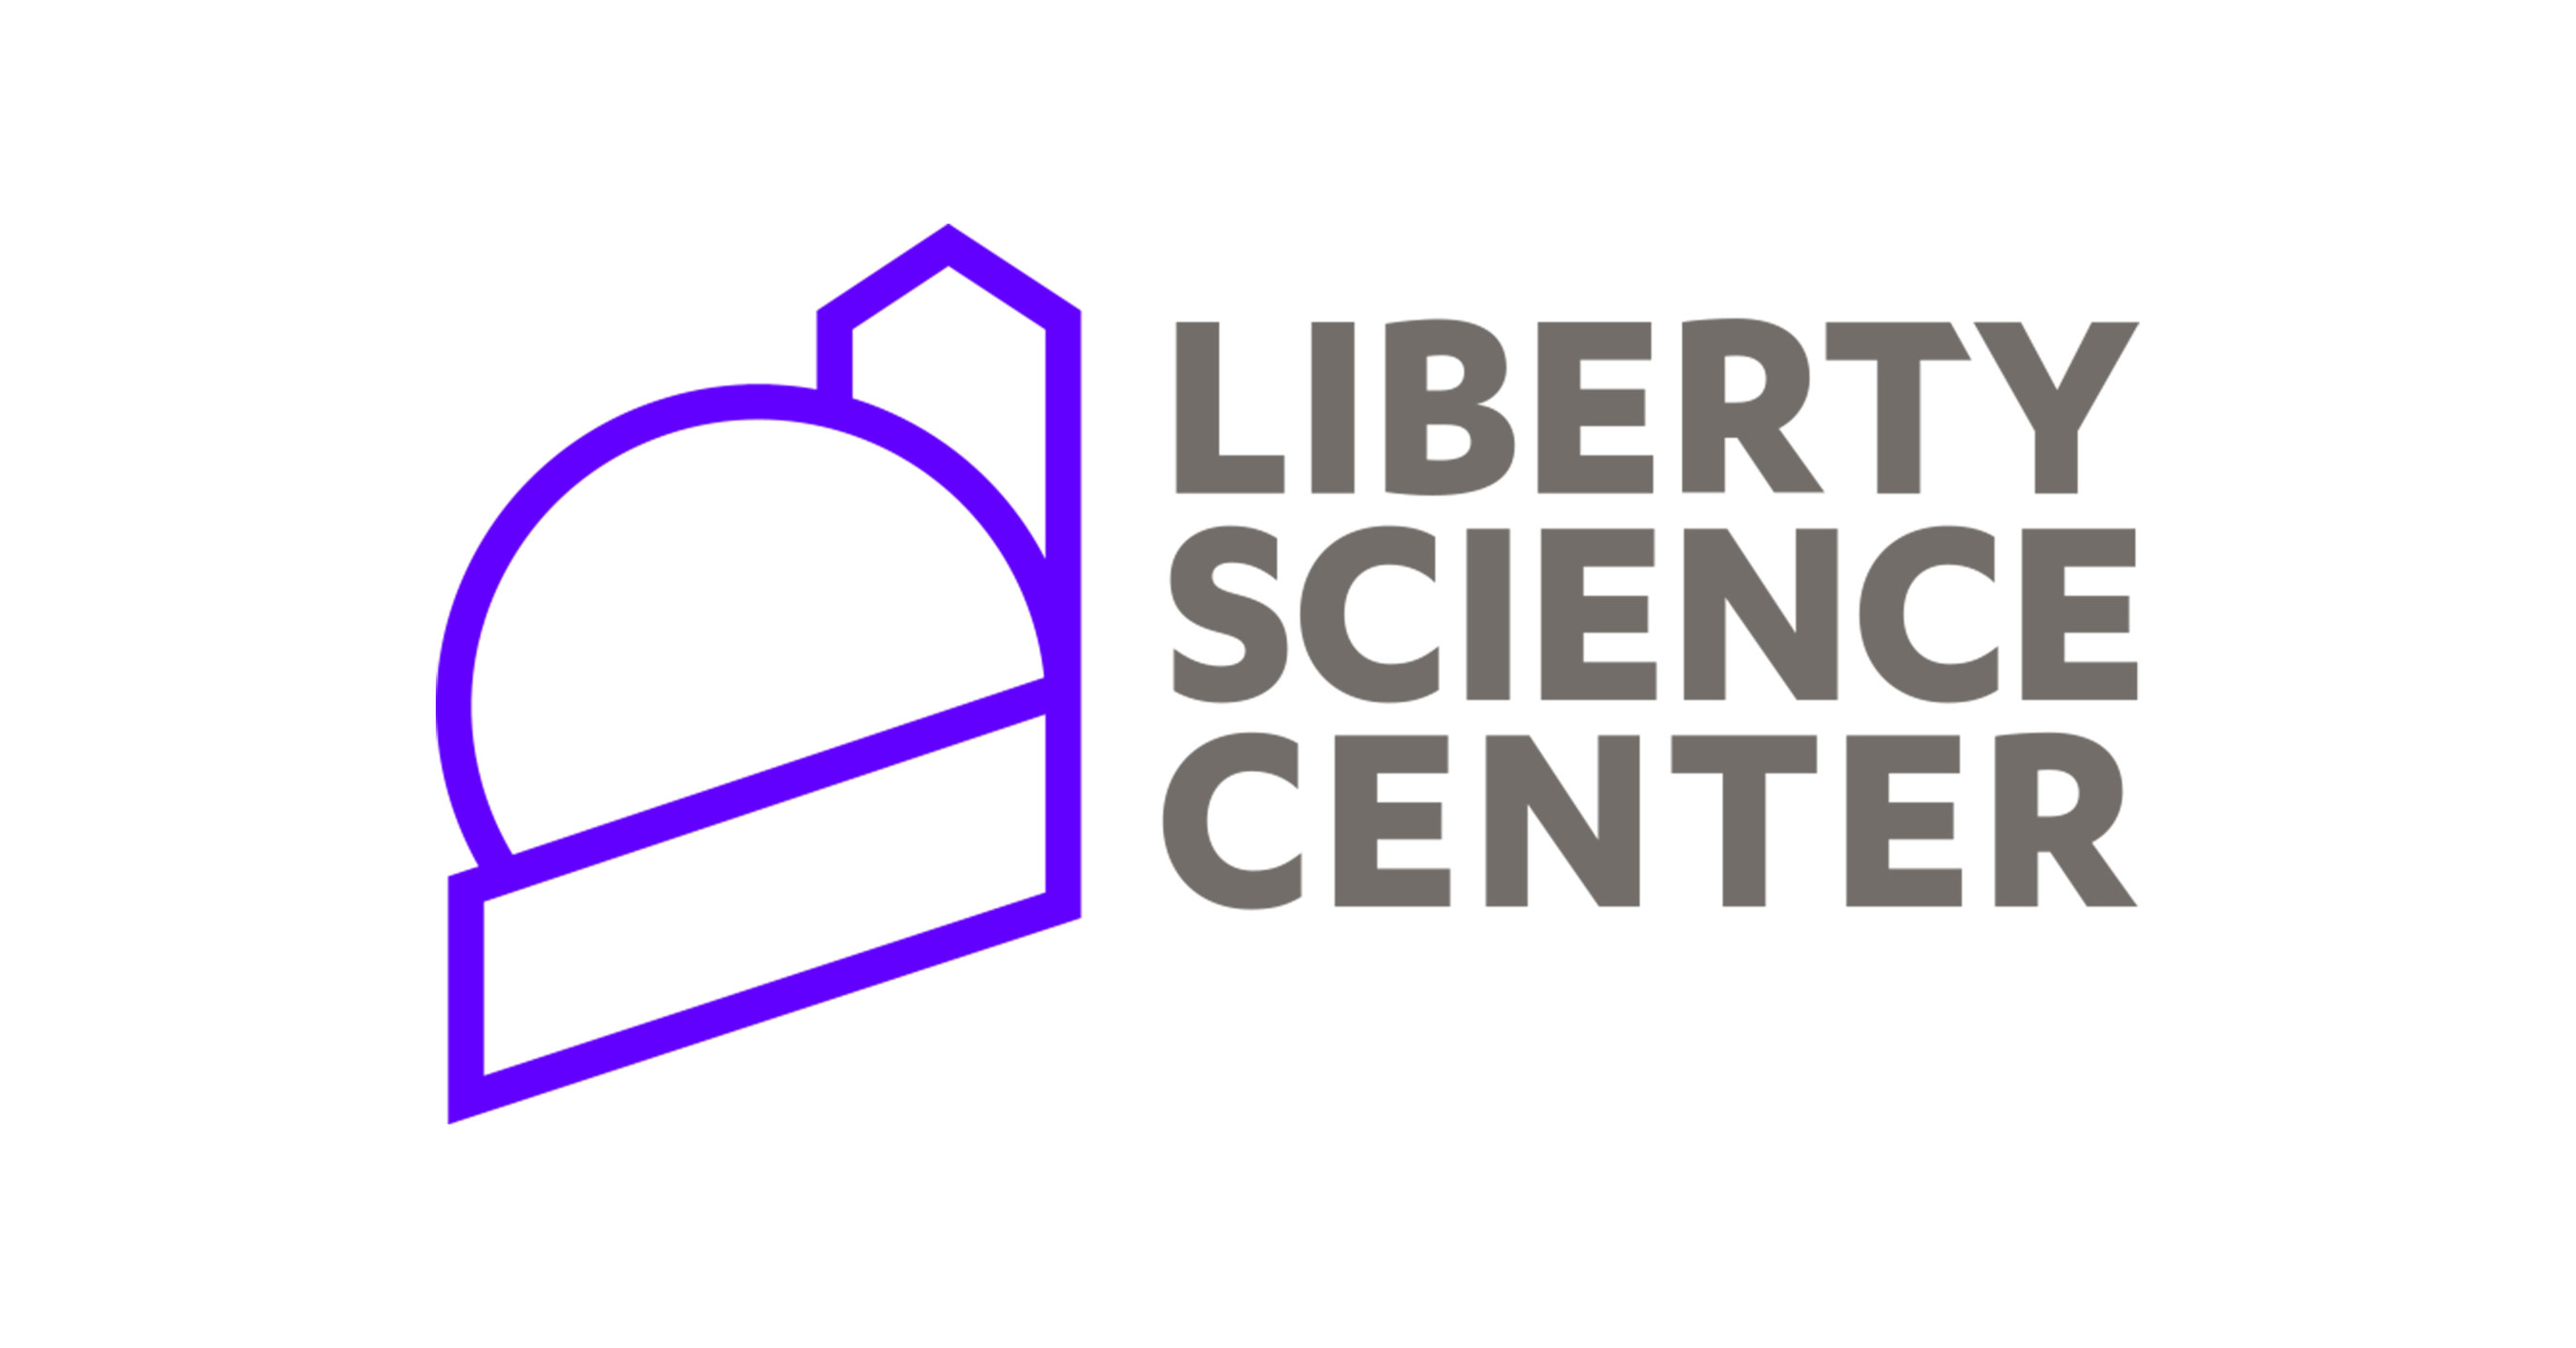 Liberty Science Center :: Guinness World Records title achieved by